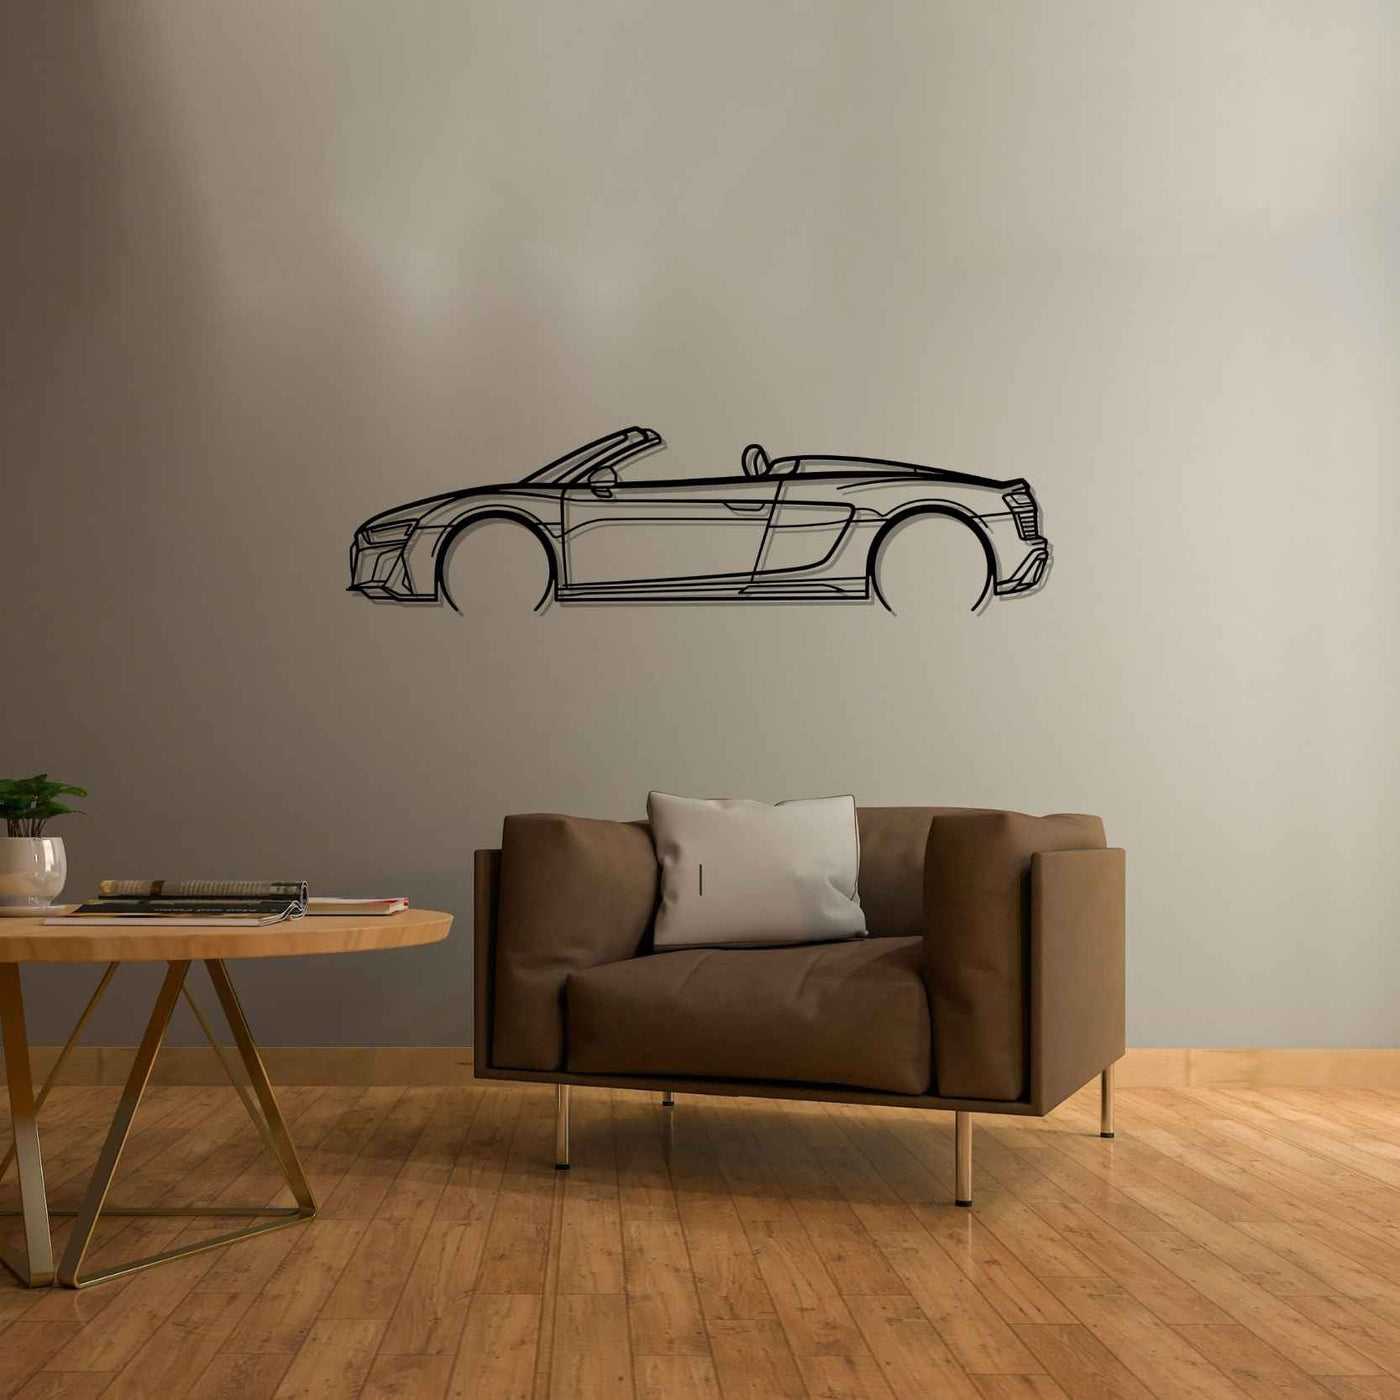 R8 V10 Spider 2022 Detailed Silhouette Metal Wall Art